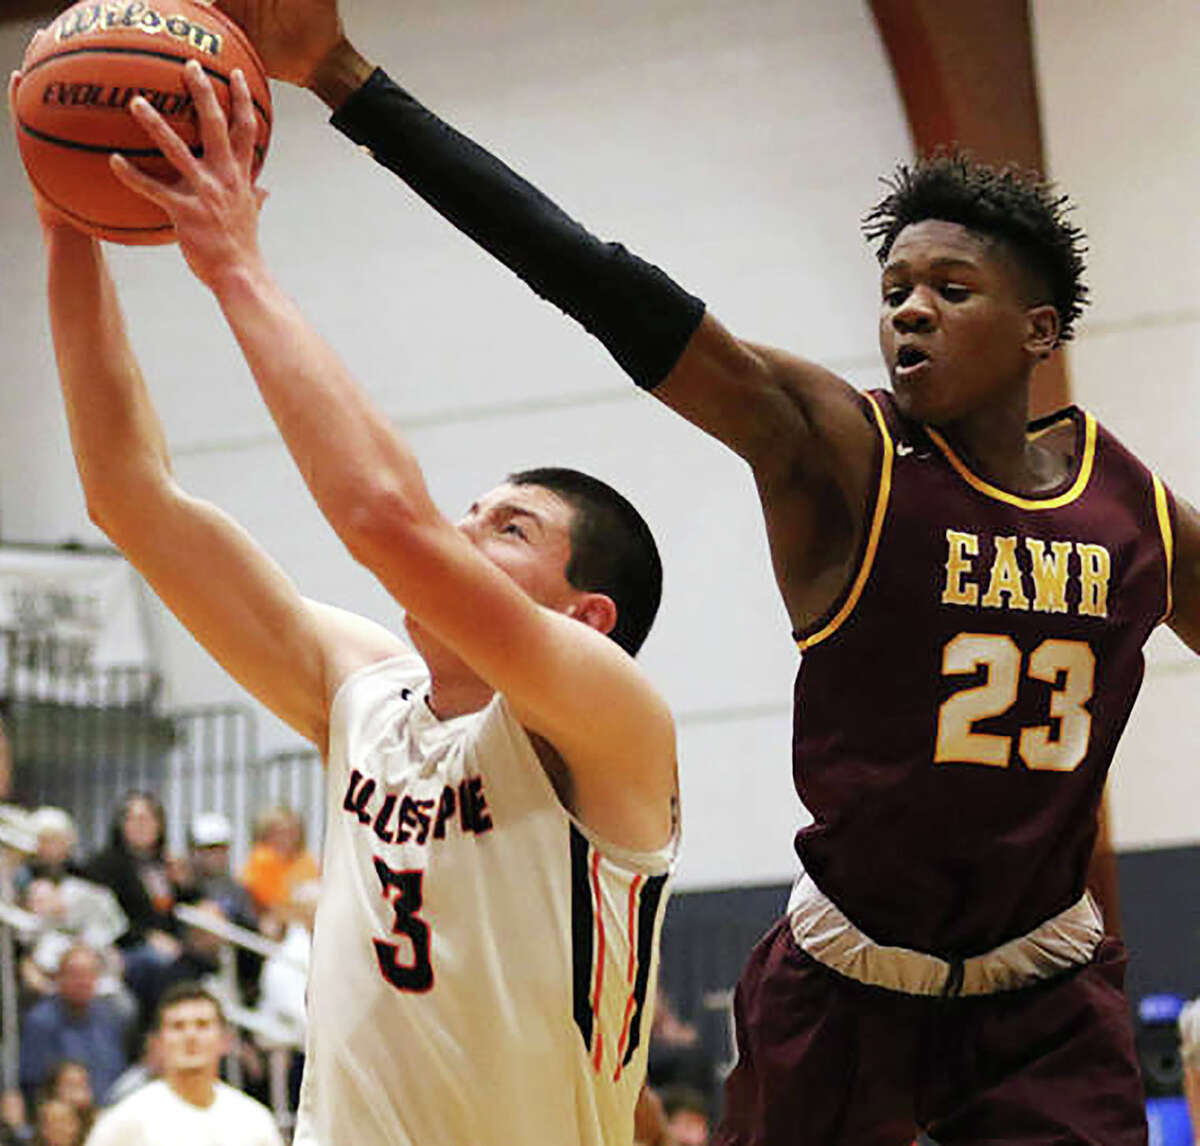 EA-0WR's Antonio Hardin, right, scored 10 of his 15 points in the first quarter, including a pair of 3-point baskets, in the Oilers' Tuesday win at Southwestern. He is shown in earlier action.